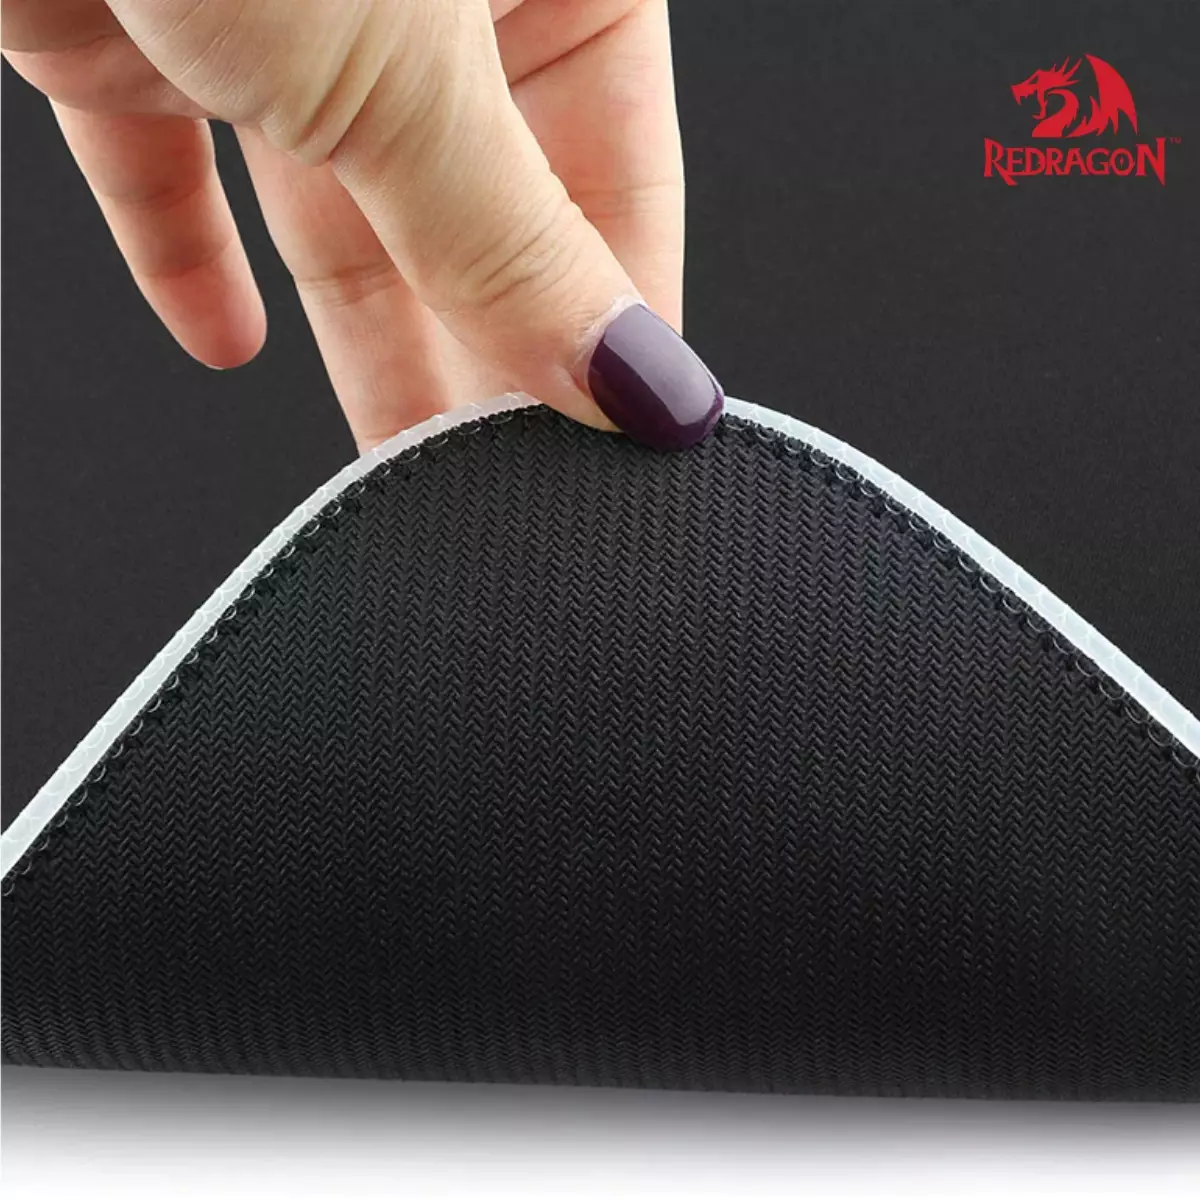 MOUSE PAD REDRAGON LULUCA - L030 - BFTECH